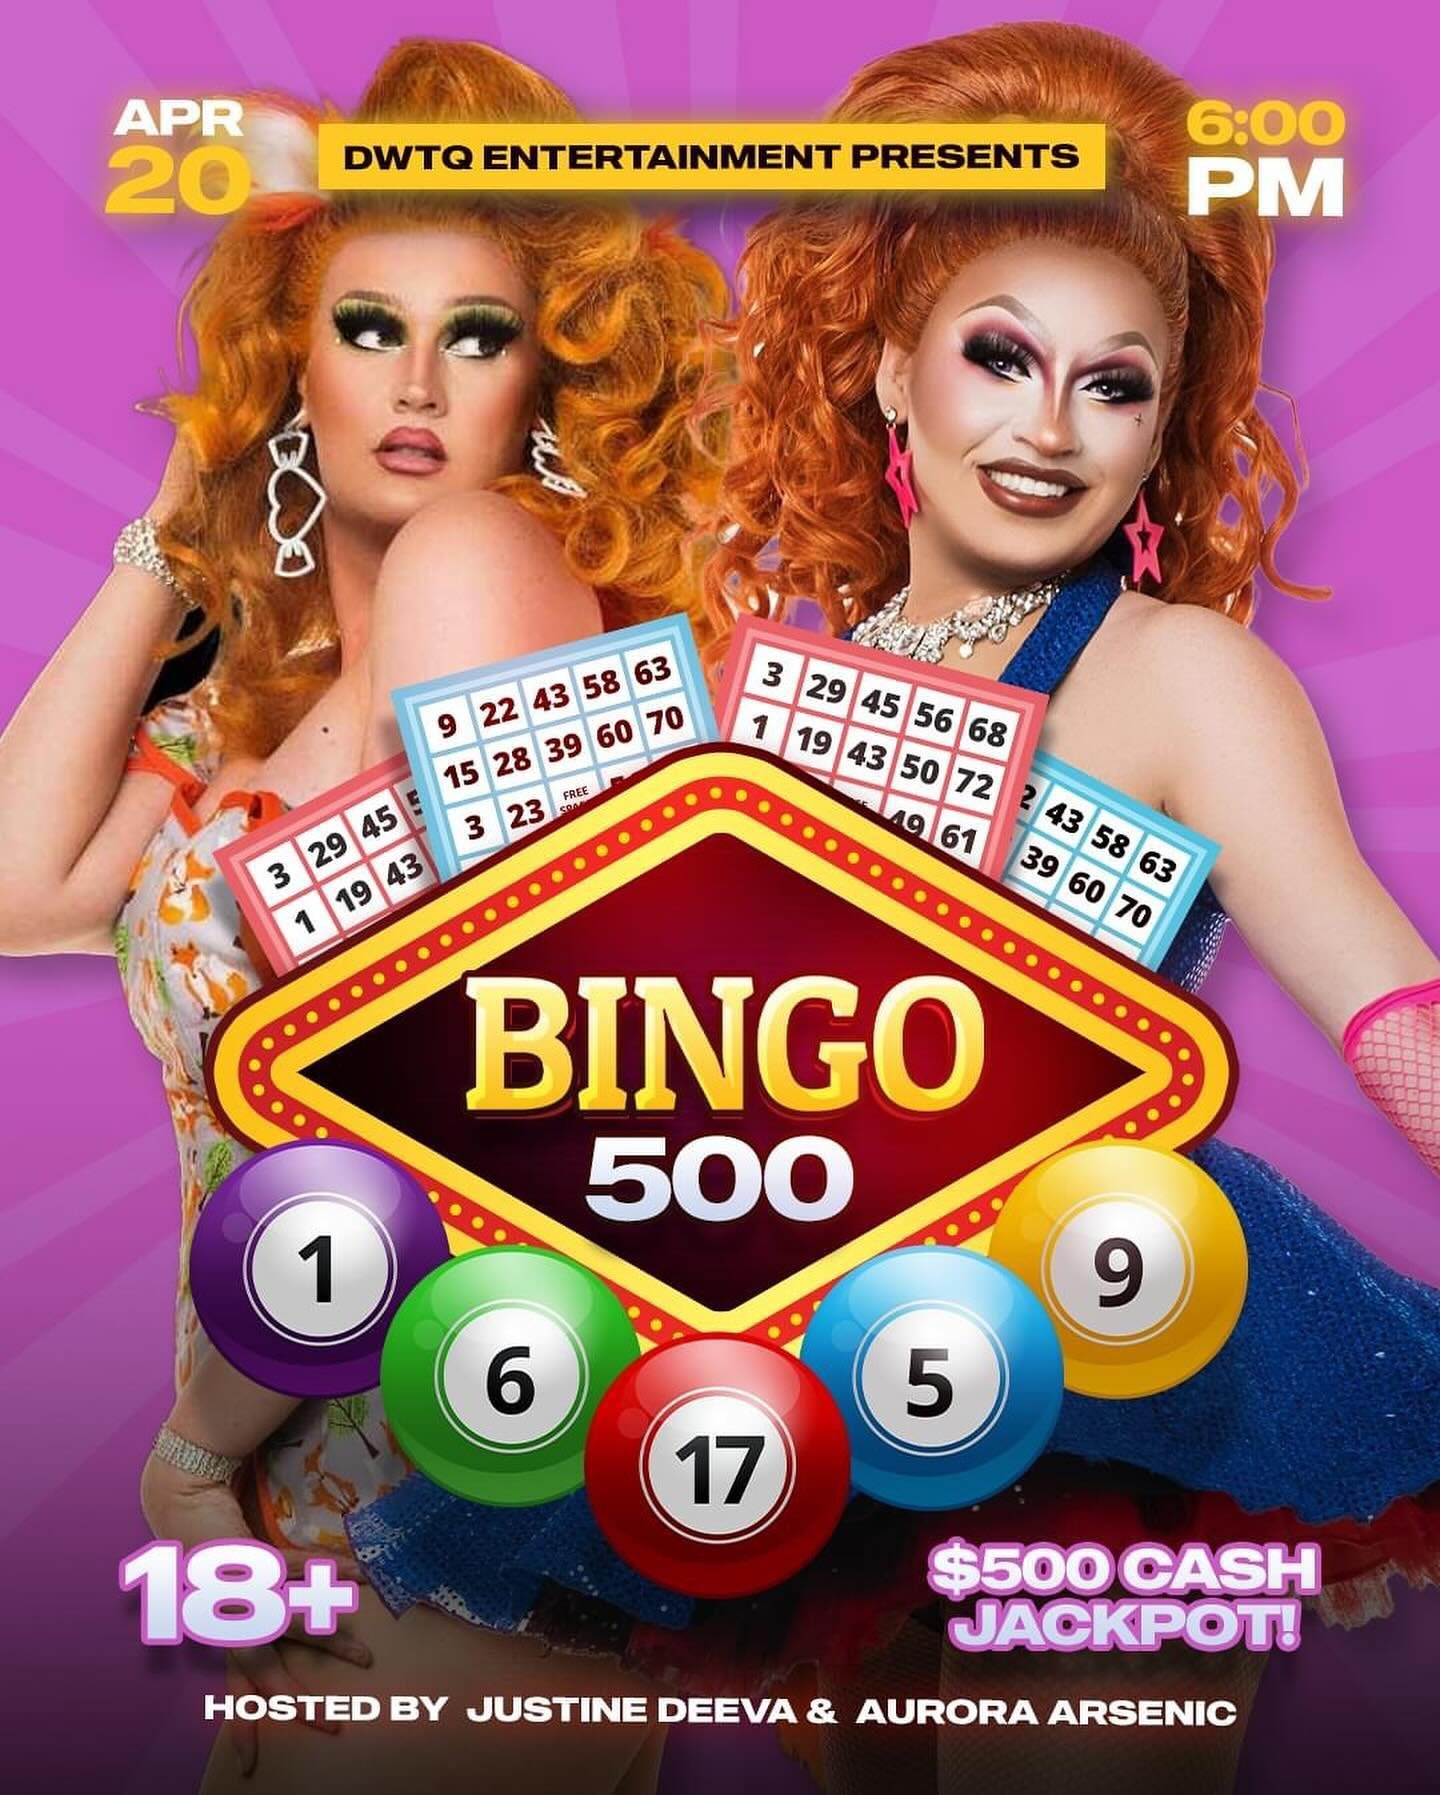 Get the girls and come to Drag Queen Bingo tickets must be purchase soon - The Saturday Night !!!

#drag #bingo #queens #dance #sing #lgbtq🌈 #party #hiii